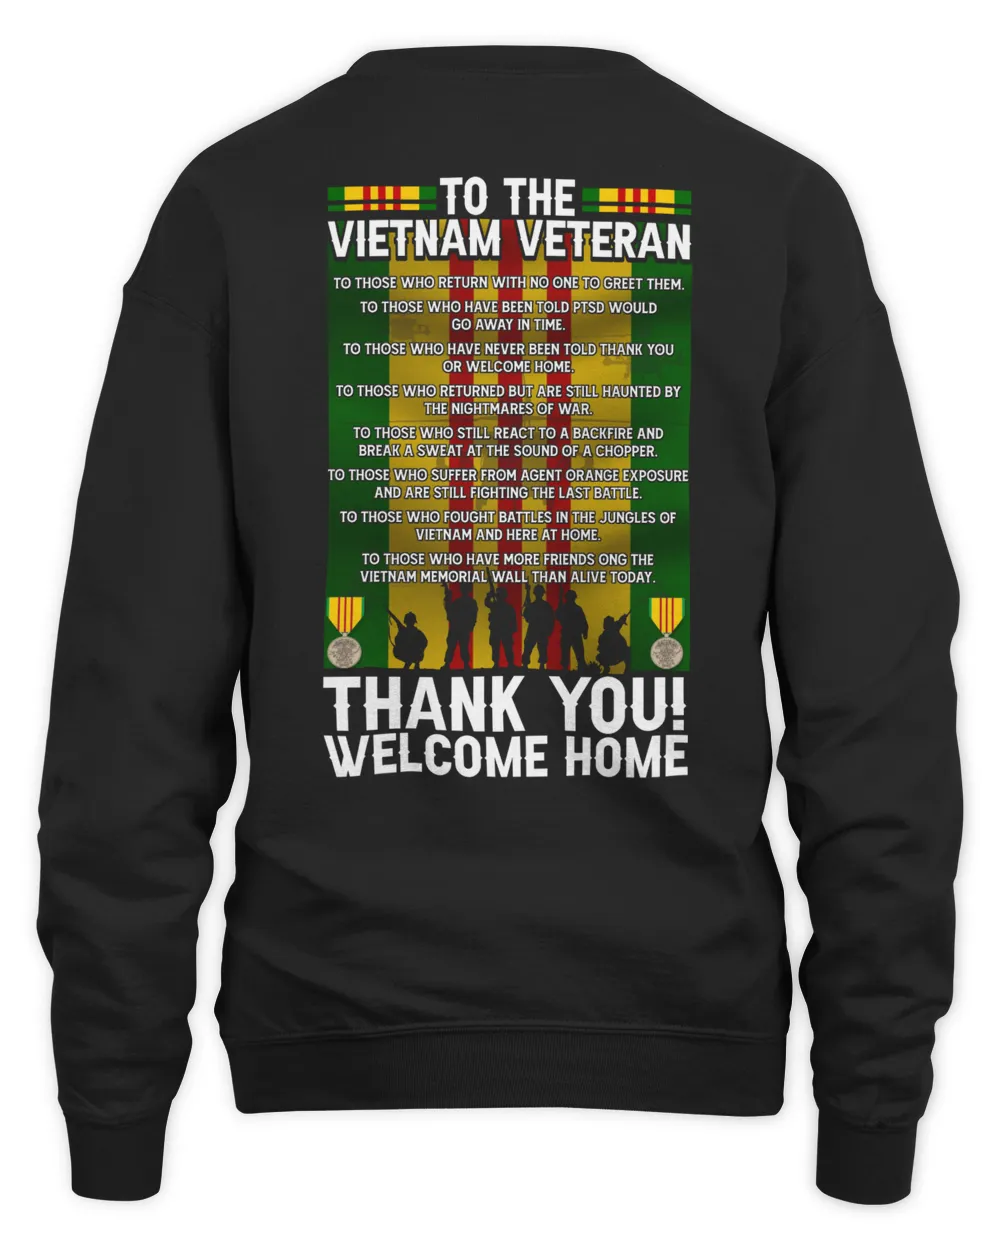 TO THE VIETNAM VETERAN, THANK YOU, WELCOME HOME